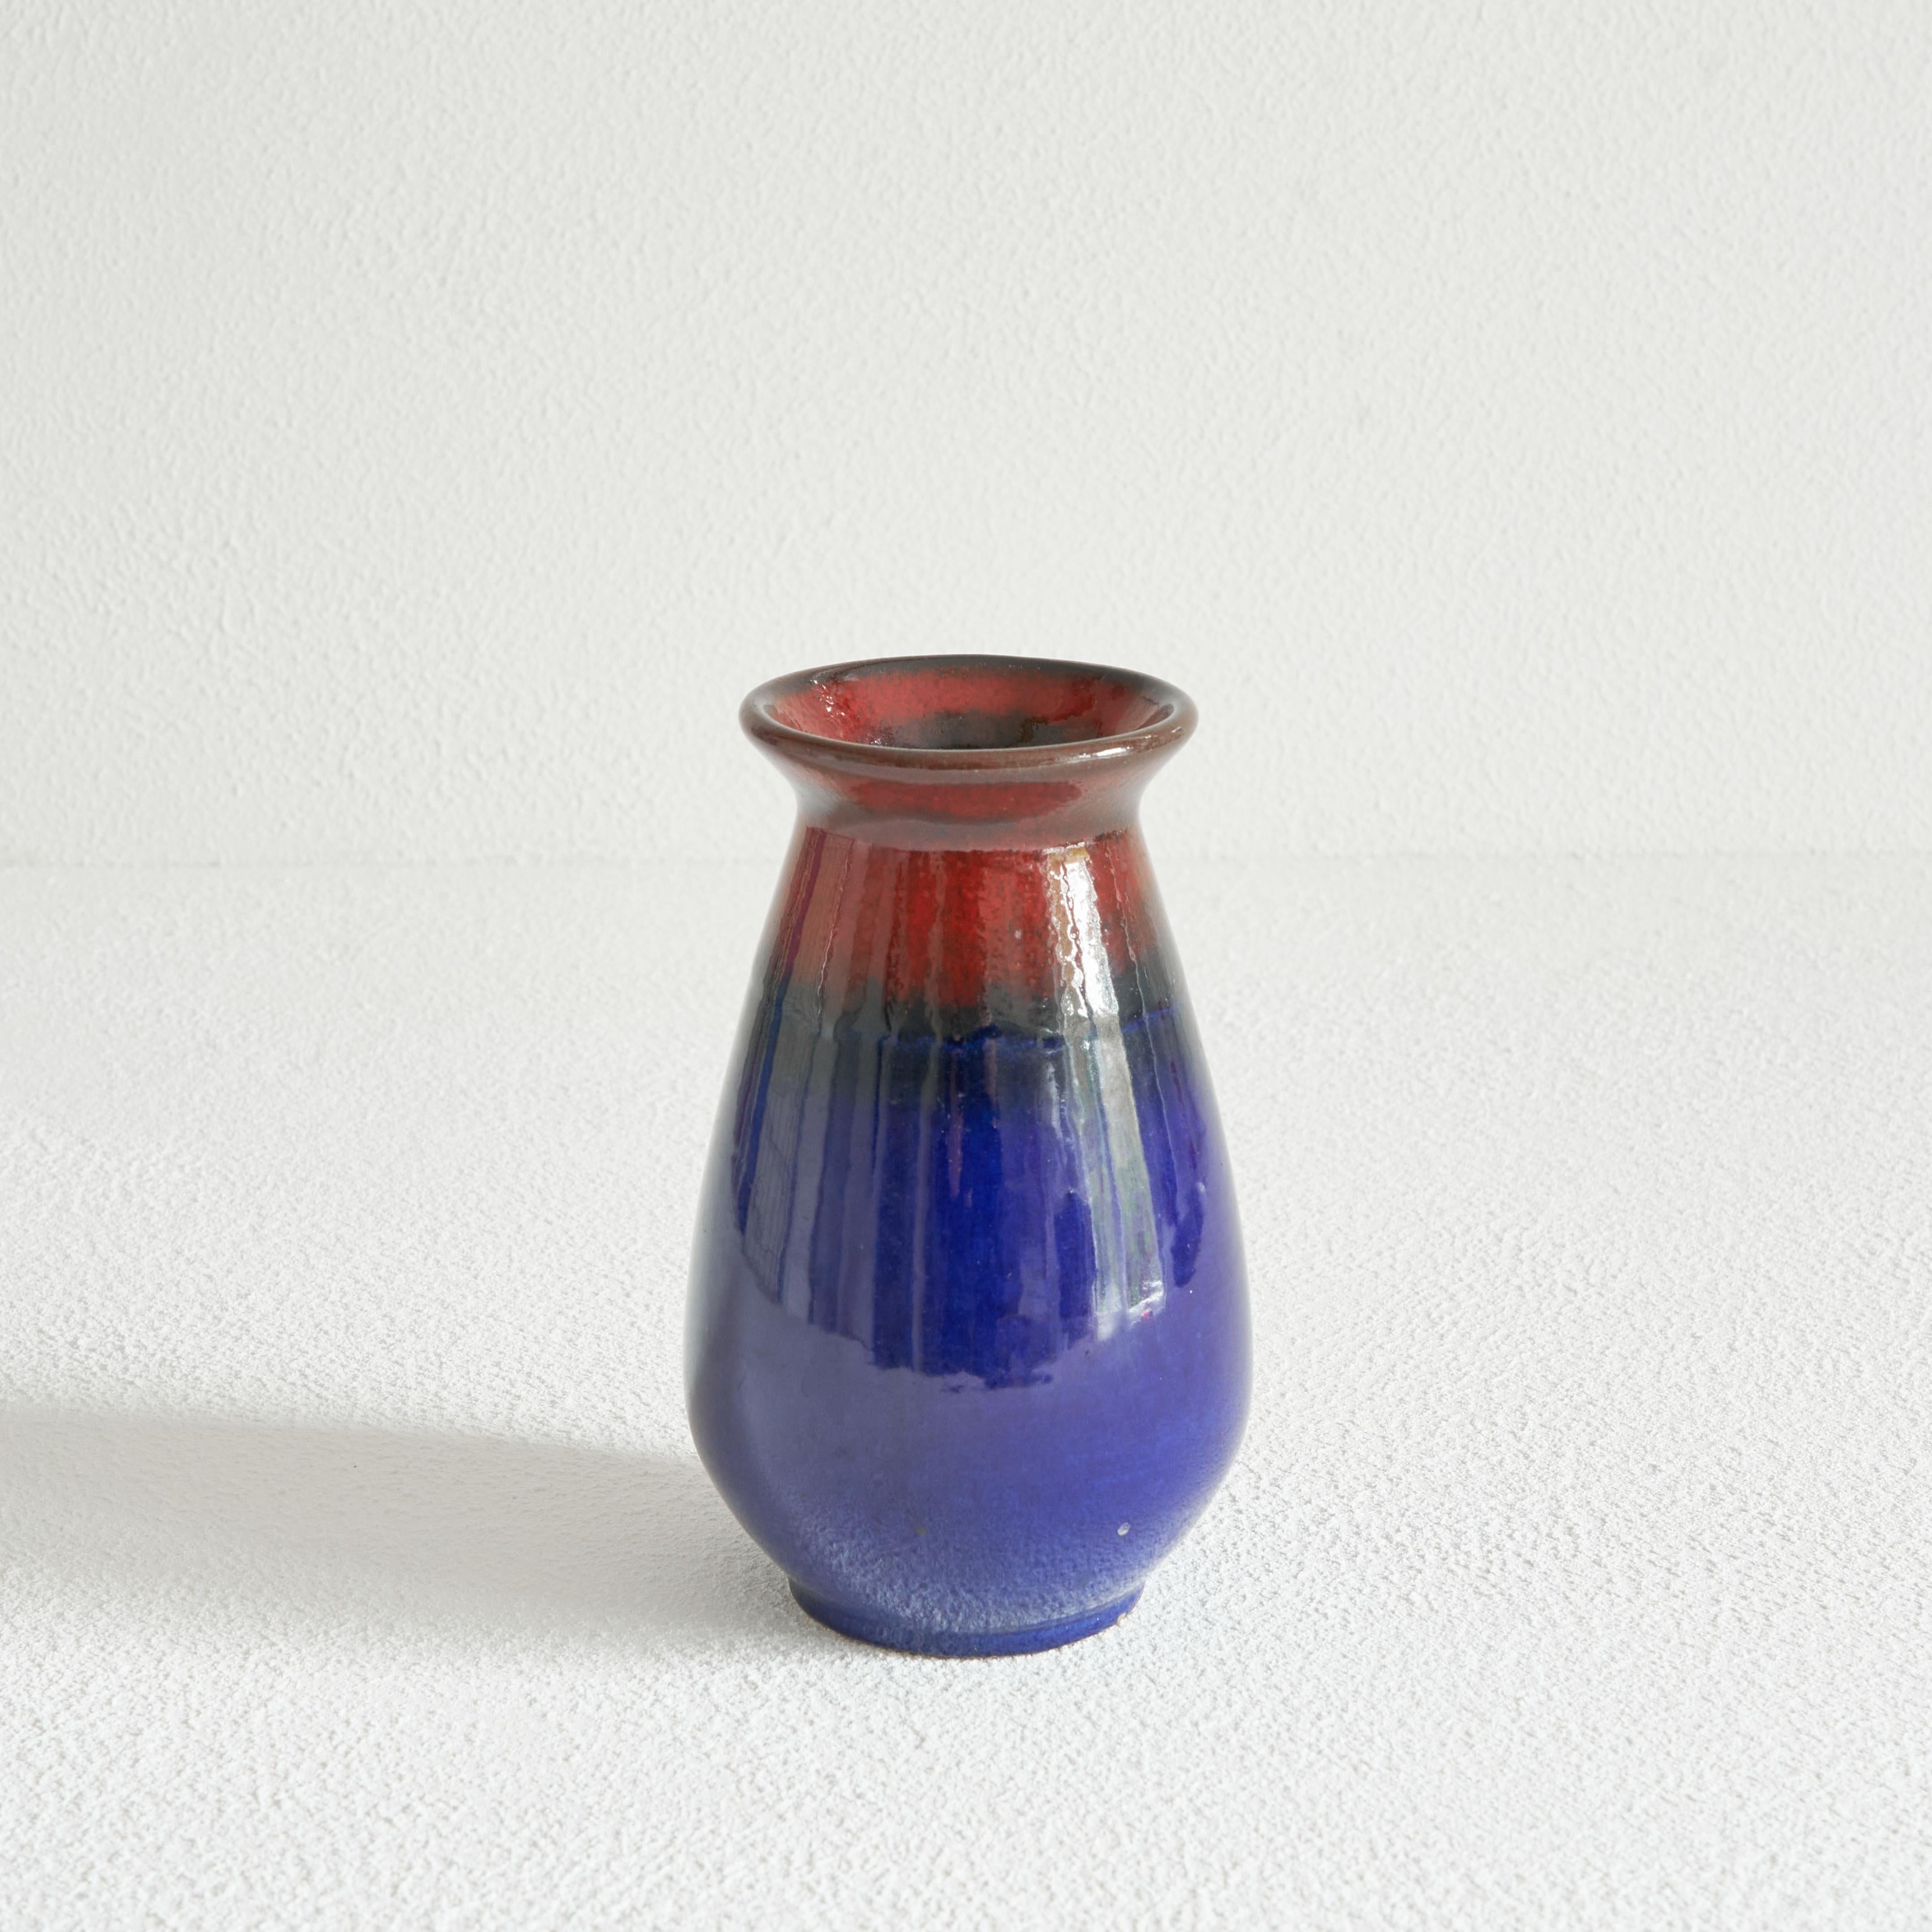 Midcentury Studio Pottery Vase by Jasba Keramik, Germany, 1960s.

Wonderful and colorful West Germany Studio Pottery vase by Jasba Keramik. Great deep colors, shifting from blue to red with a very stylish shiny glaze. 

Featuring a simple but